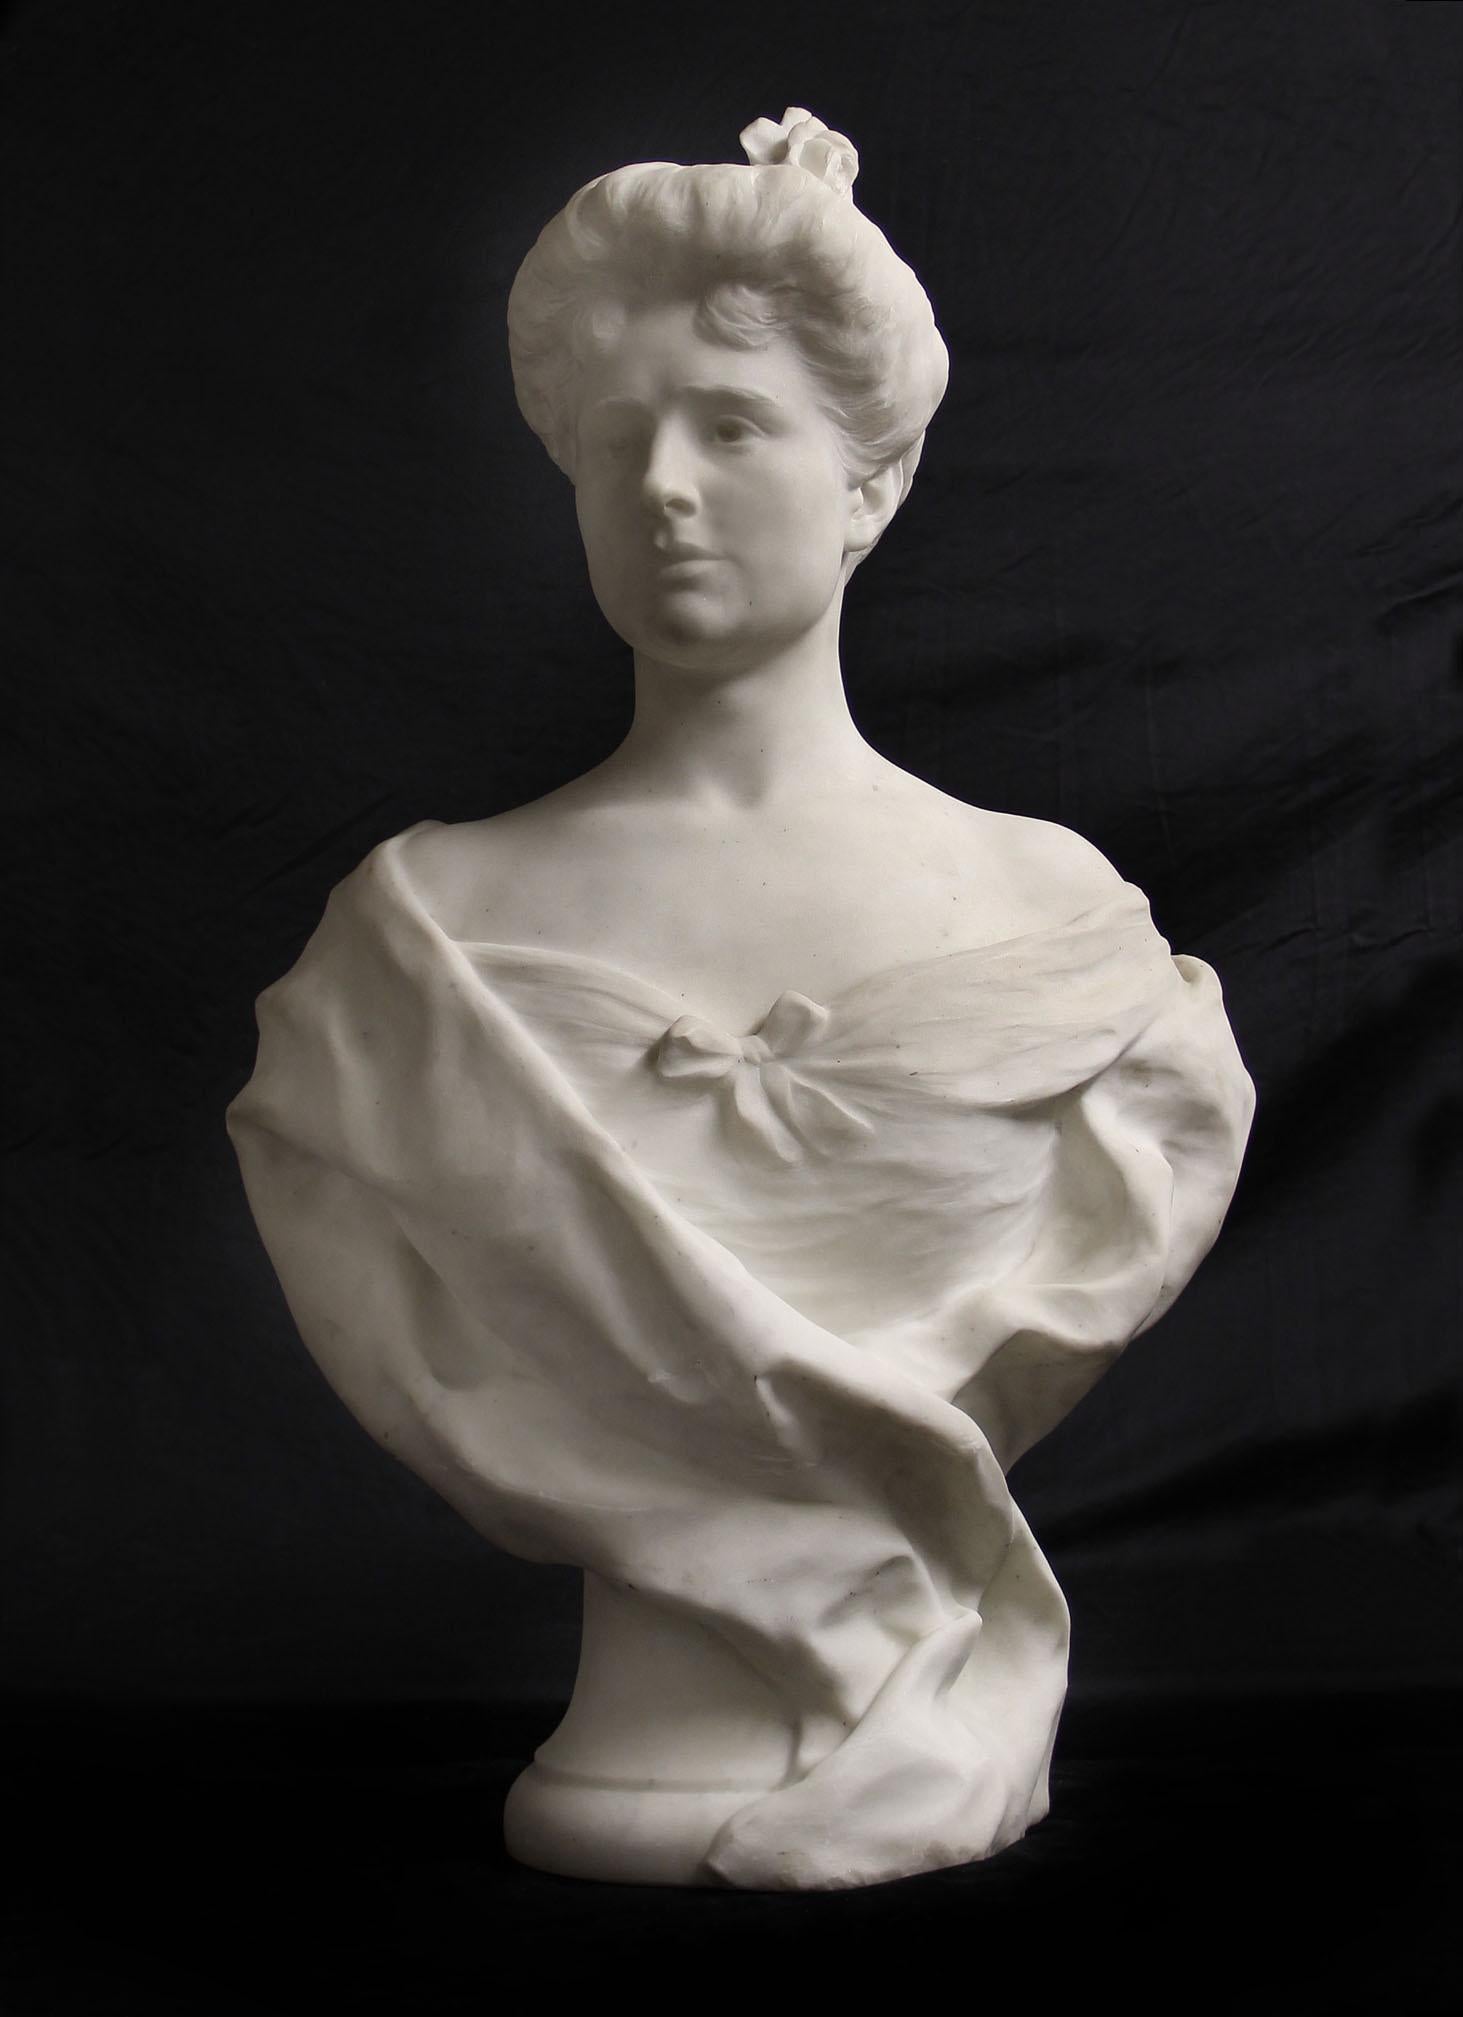 An Important and Large Early 20th Century White Carrara Marble Bust of a Beauty by Auguste Maillard

The young lady depicted with draped shoulders and bow, a flower in her hair.

Signed Aug. Maillard 1905 to the back.

Auguste Maillard, born in